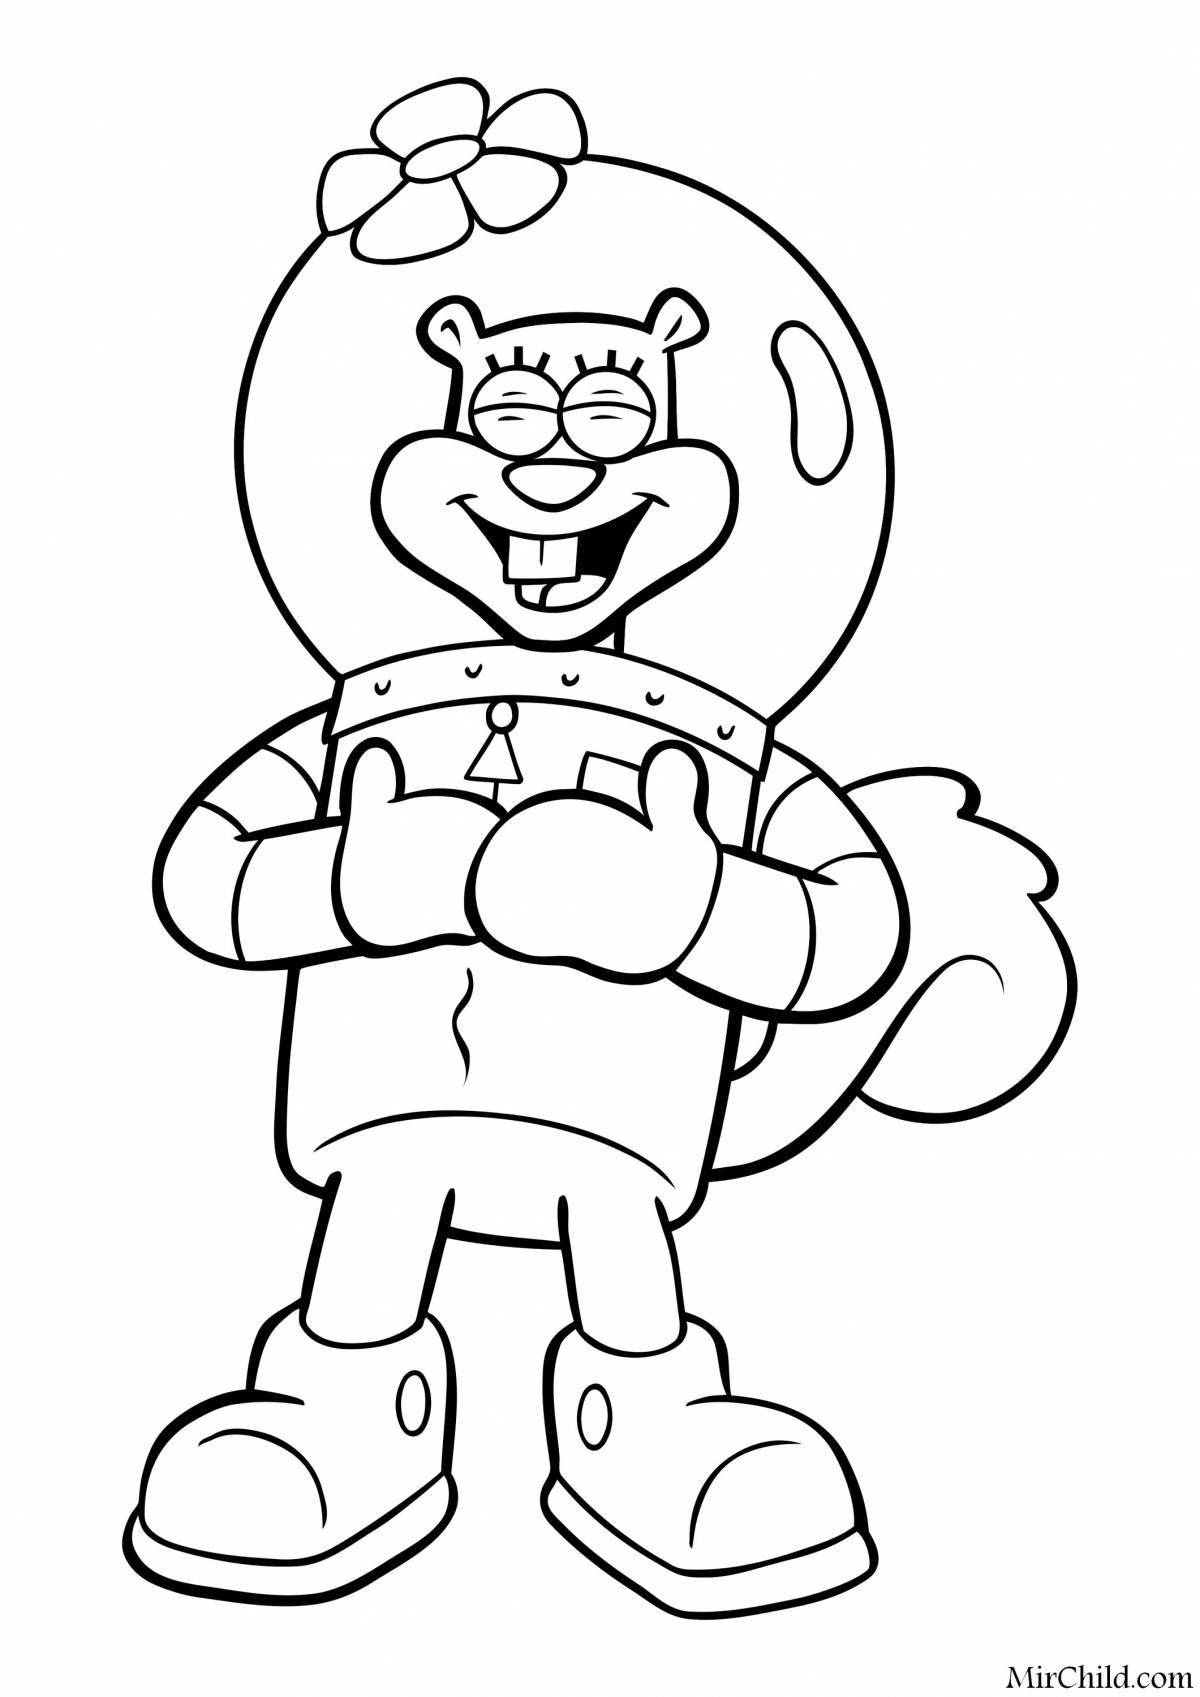 Sandy spongebob coloring page filled with color